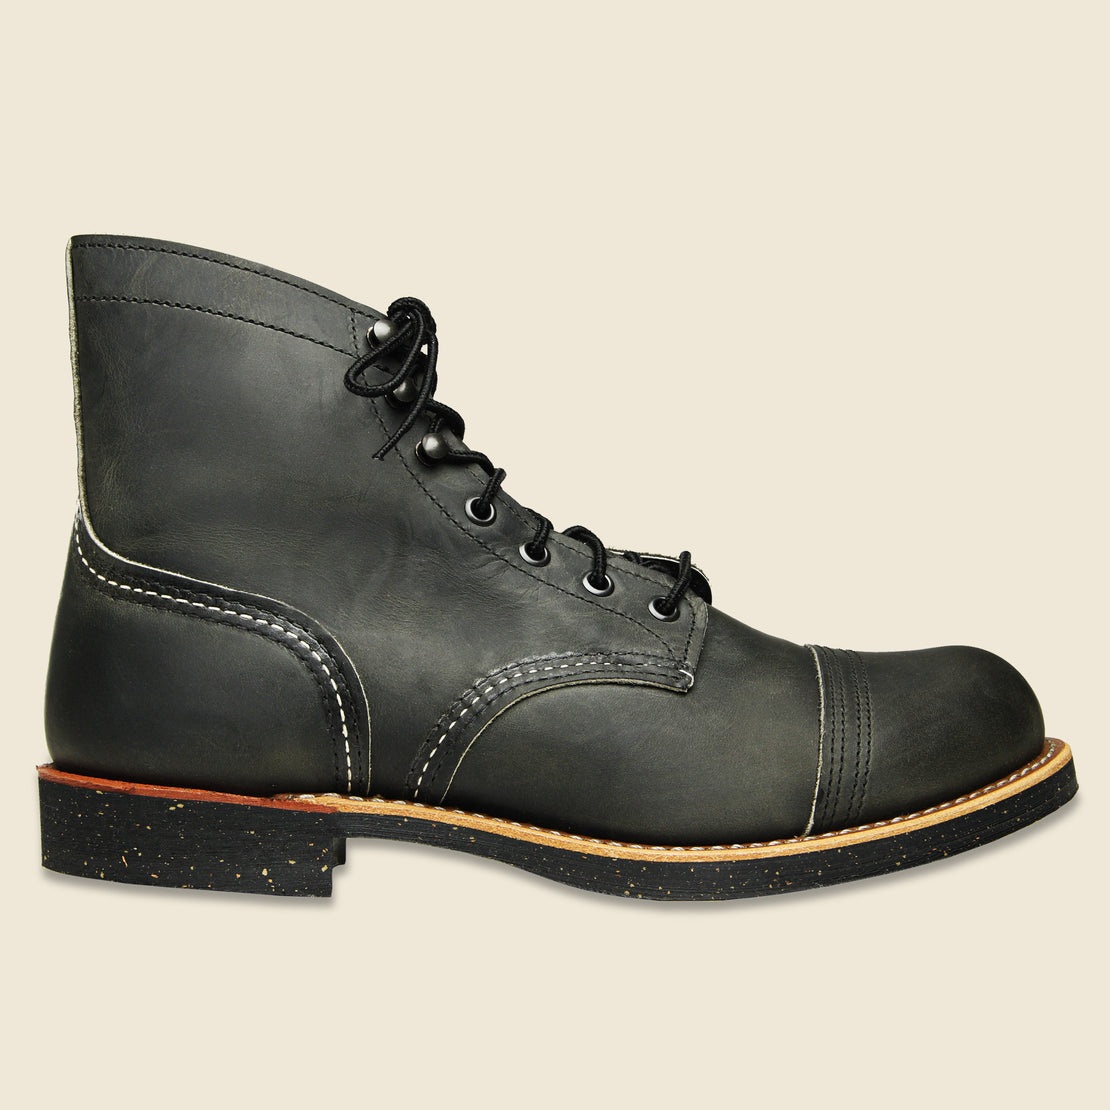 Red Wing Iron Ranger No. 8116 - Charcoal Rough & Tough - Classic Sole (Discontinued)